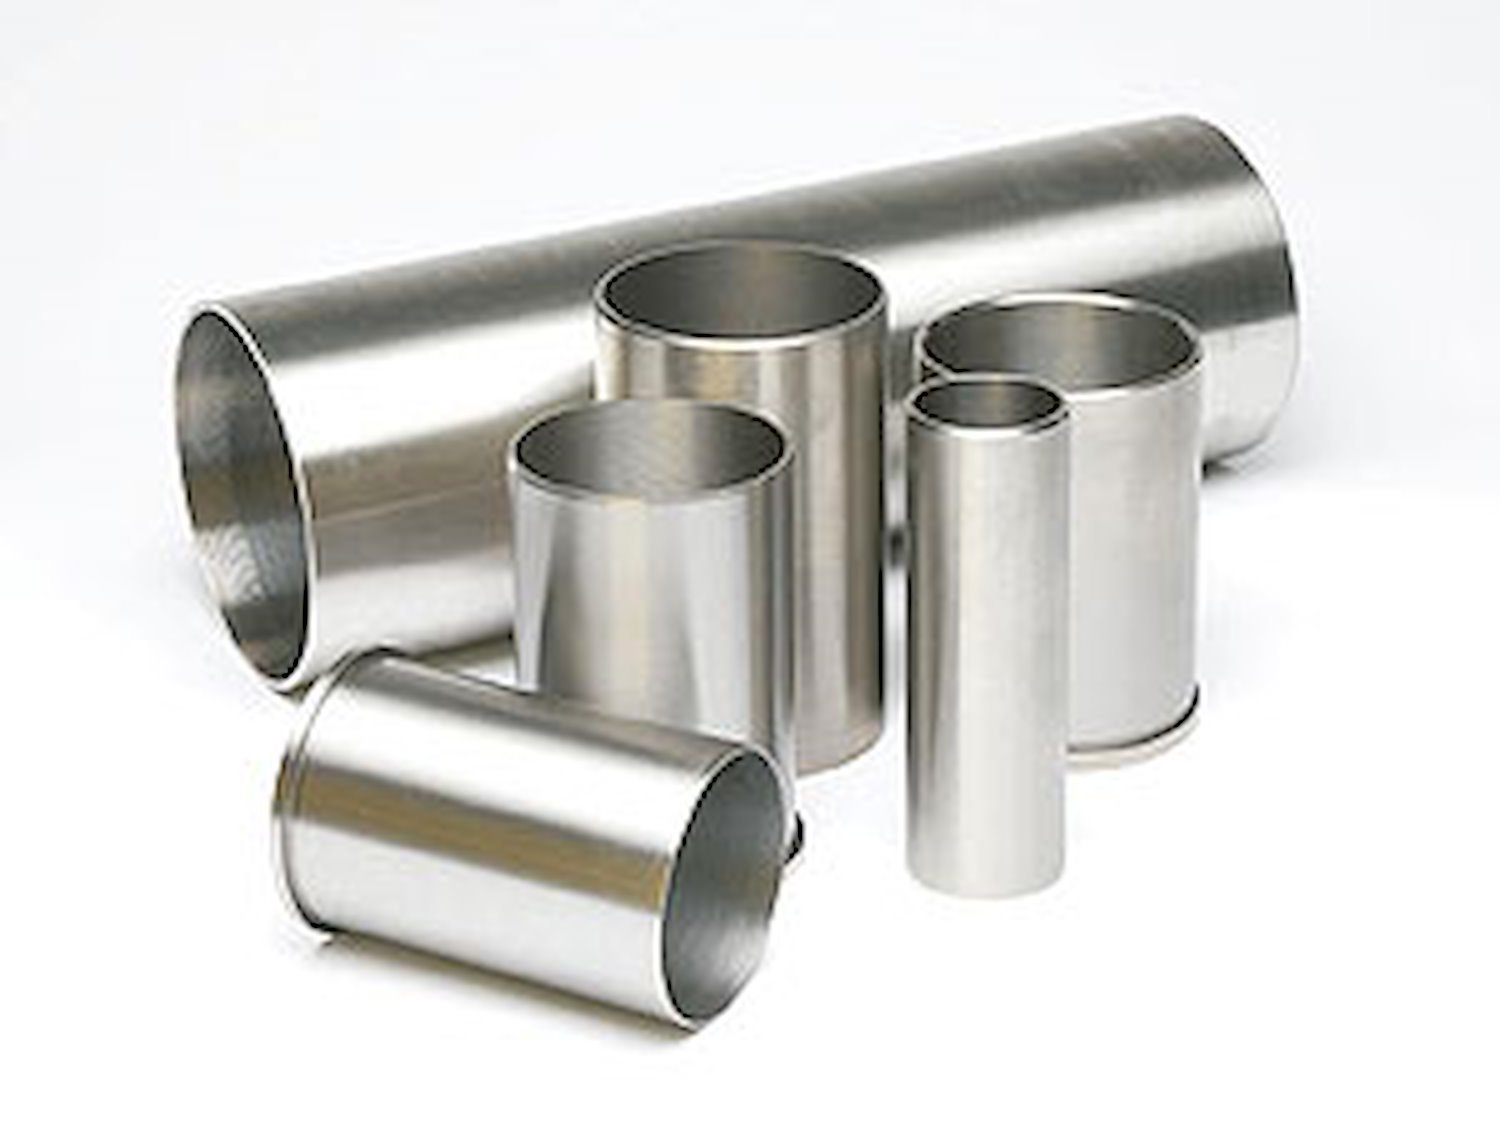 Cylinder Sleeve Bore: 3.0300" Length: 5-3/4" Wall Thickness: 1/8"